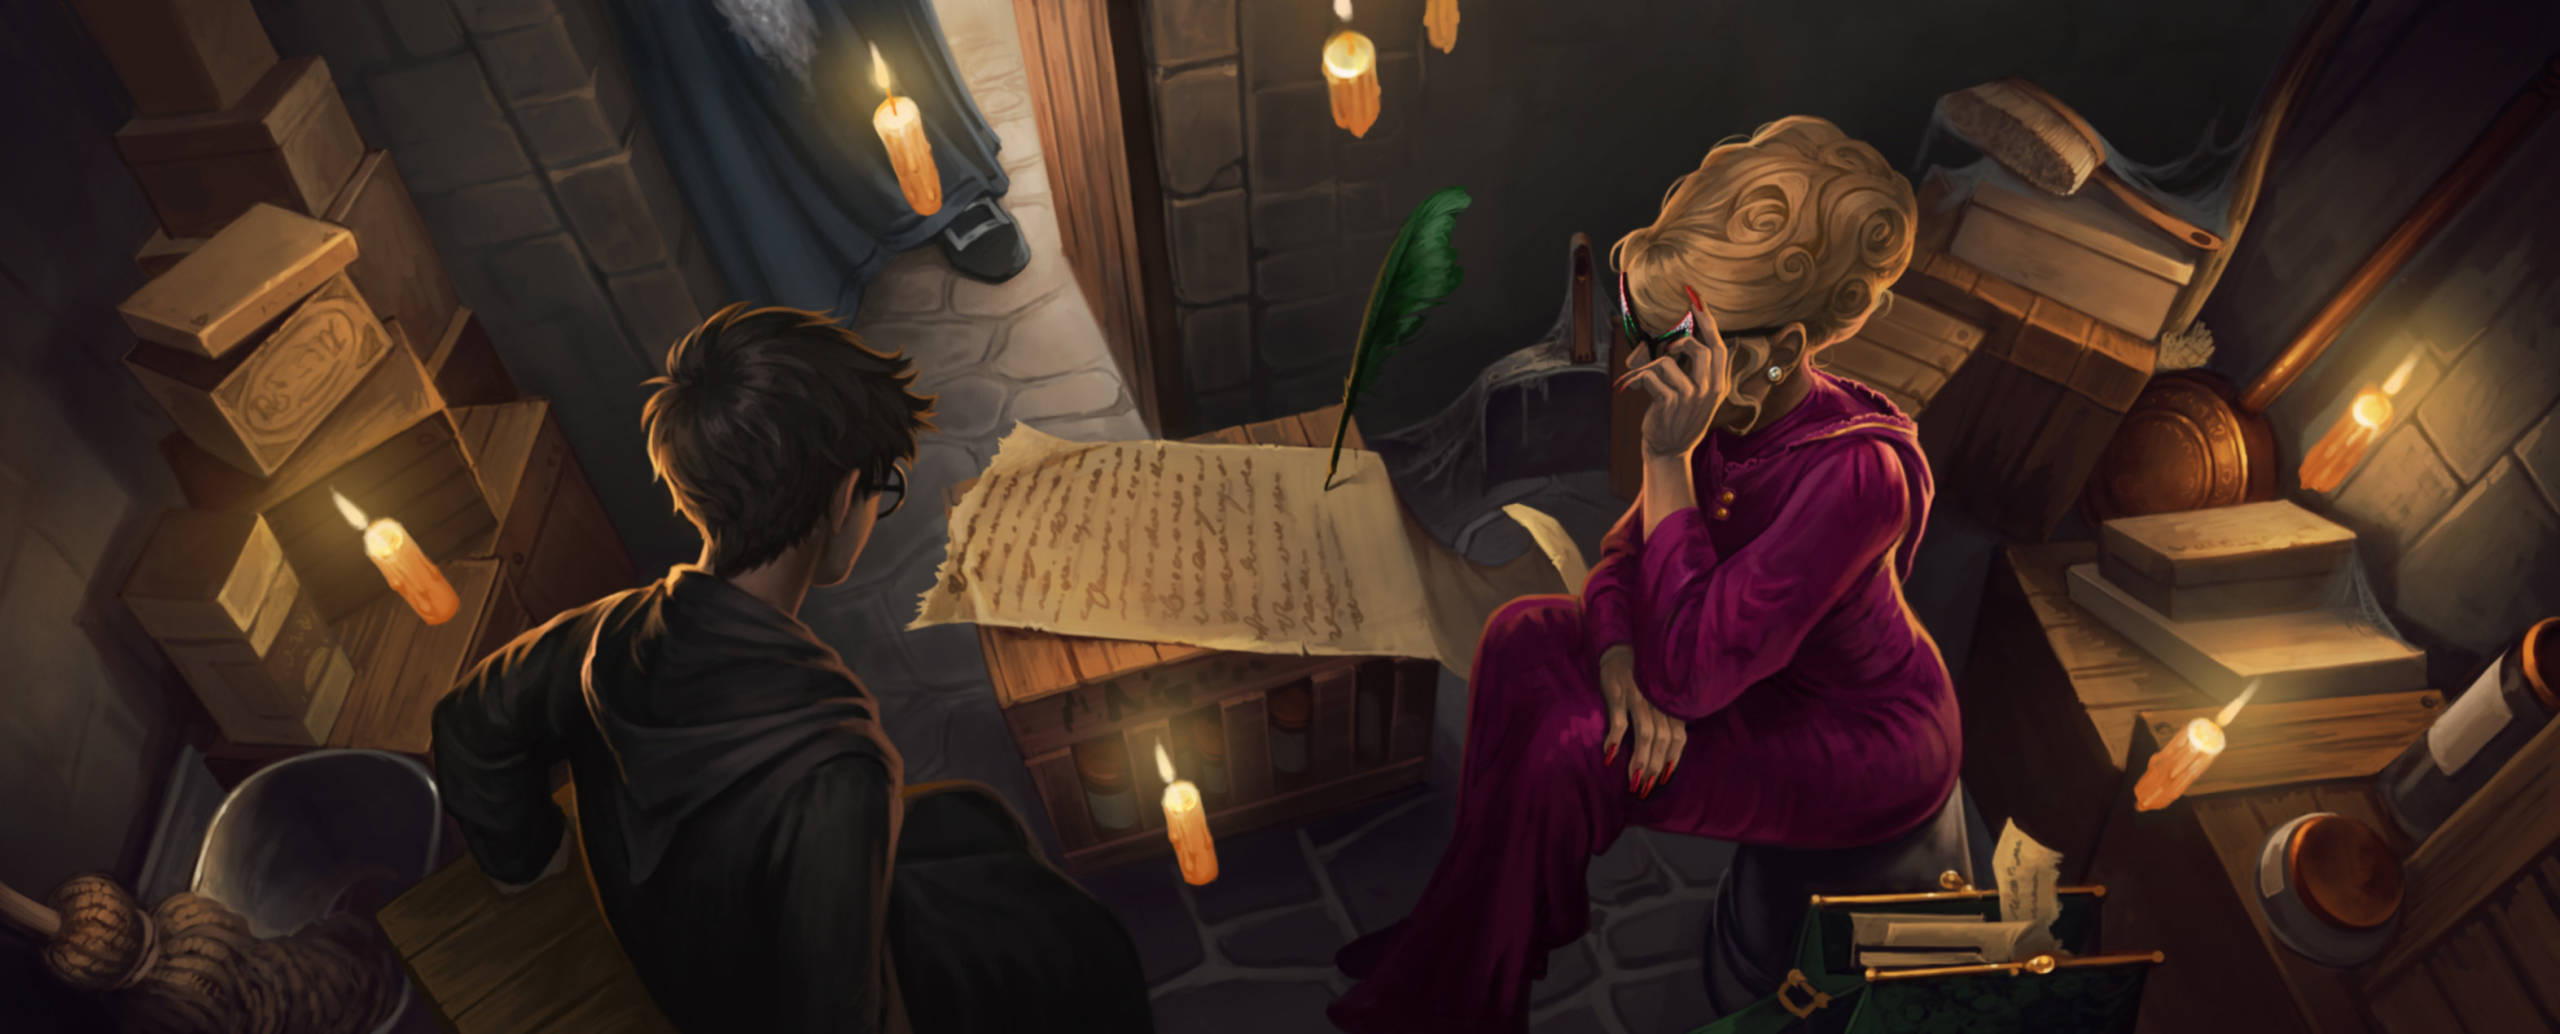 Rita Skeeter interviews Harry in the broom cupboard, her Quick Quote Quill takes down all the notes.